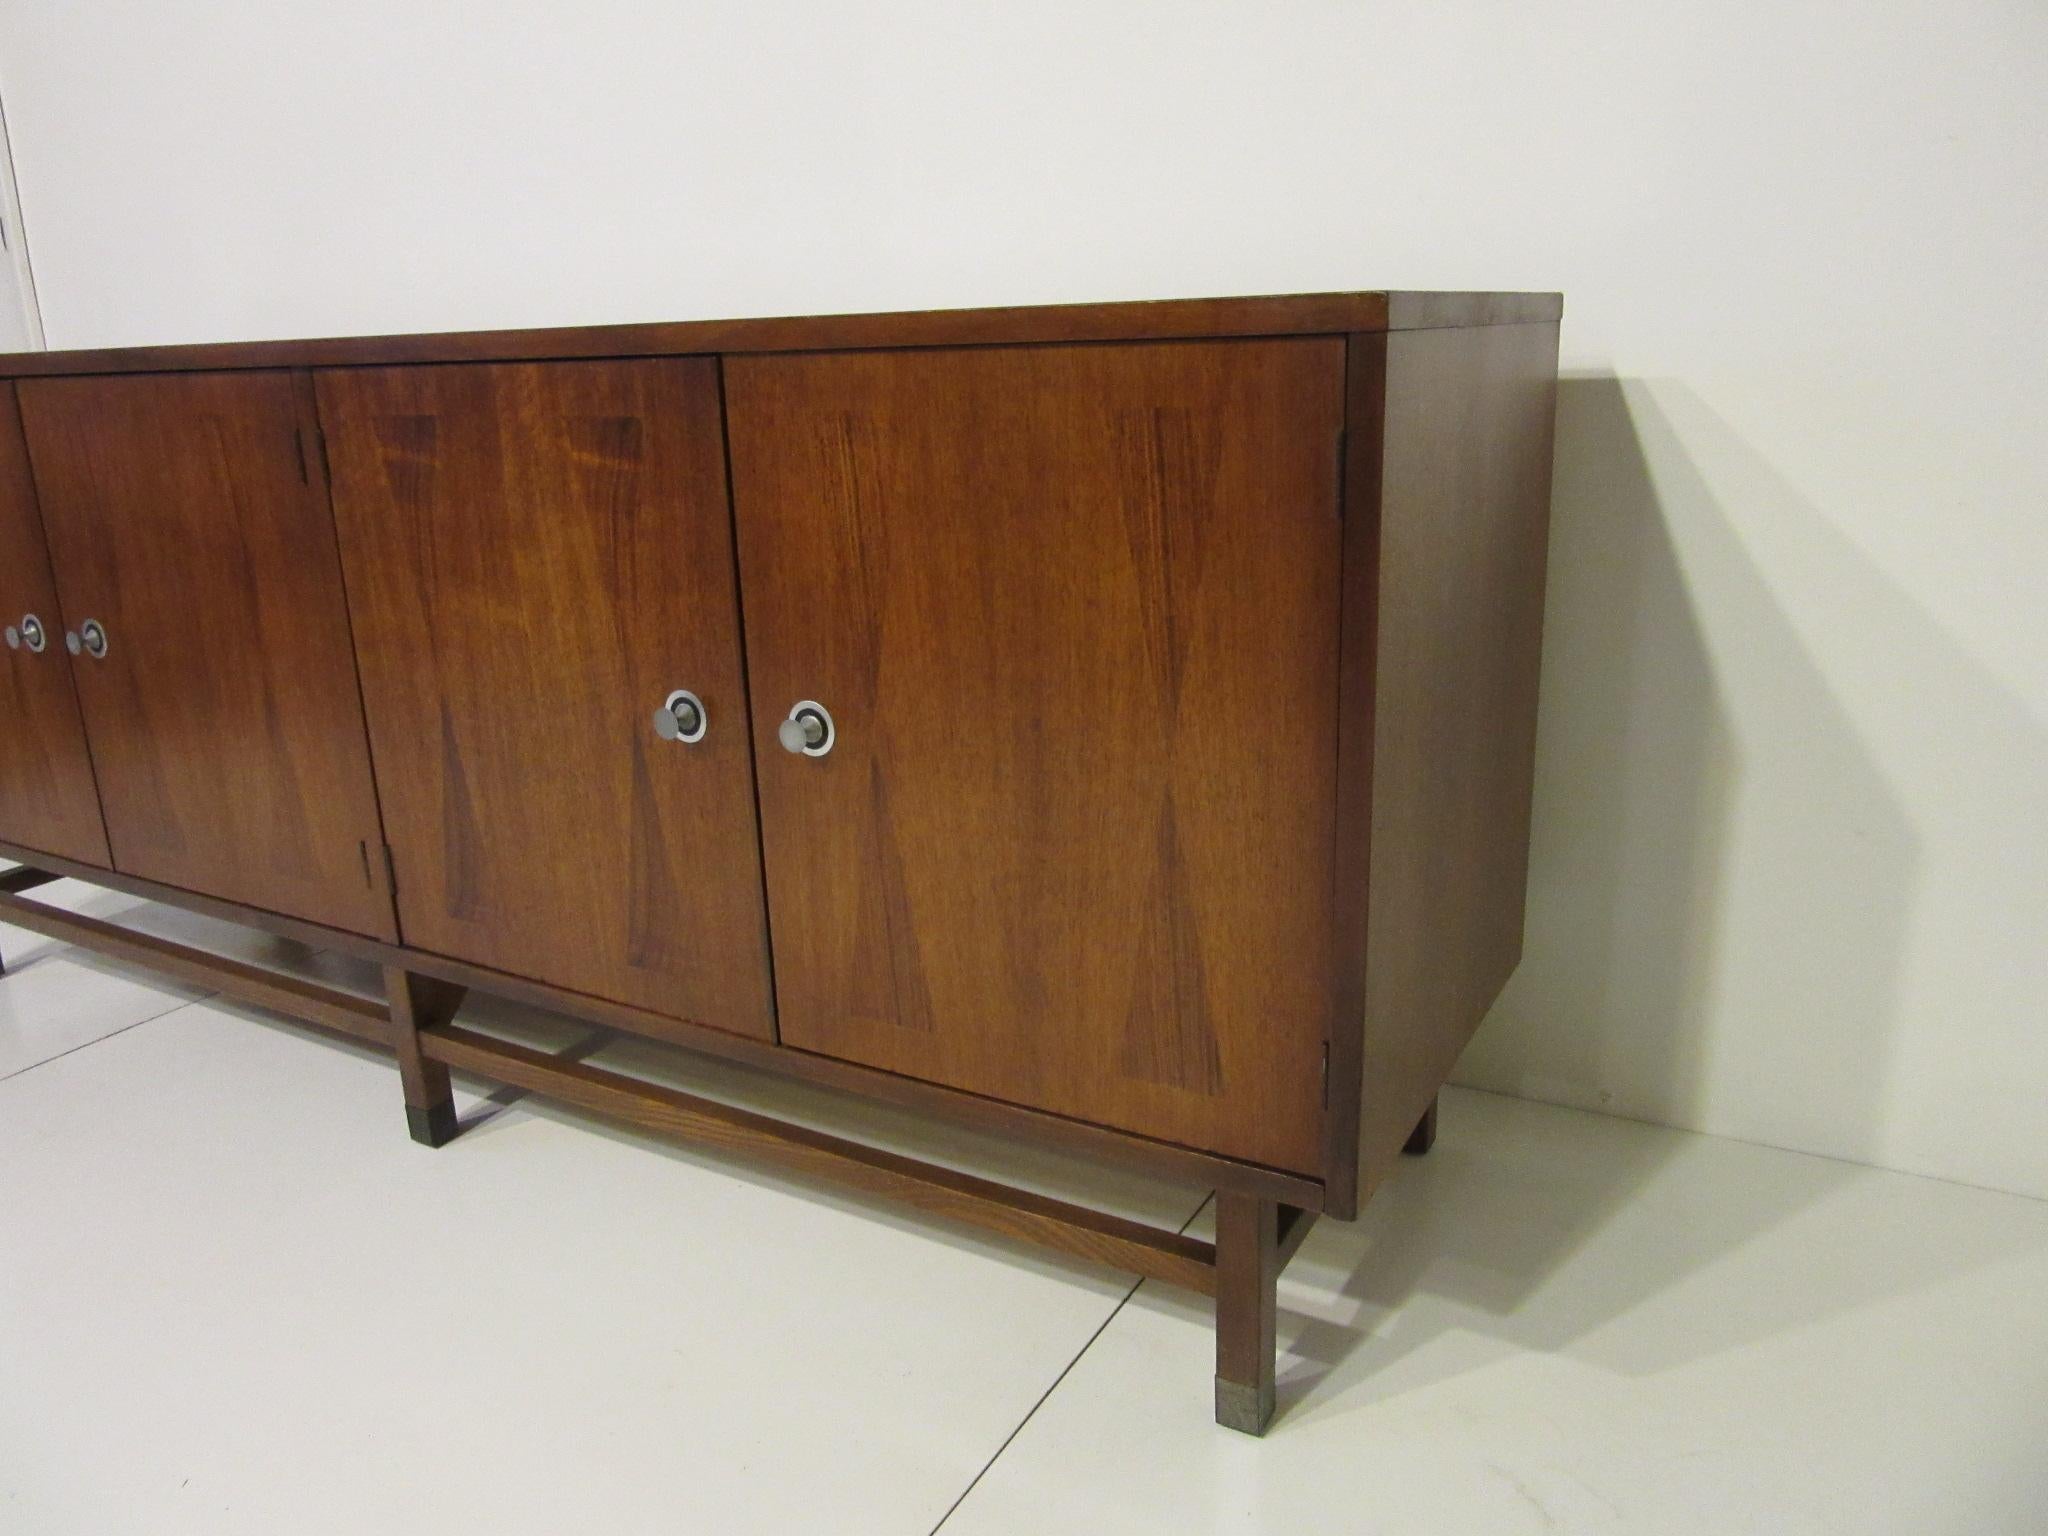 A well grained walnut credenza / server buffet with inlay rosewood details to the front and top, two doors to one side containing an adjustable shelve and three drawers to the other, one having dividers for smaller items. Turned stainless pulls to